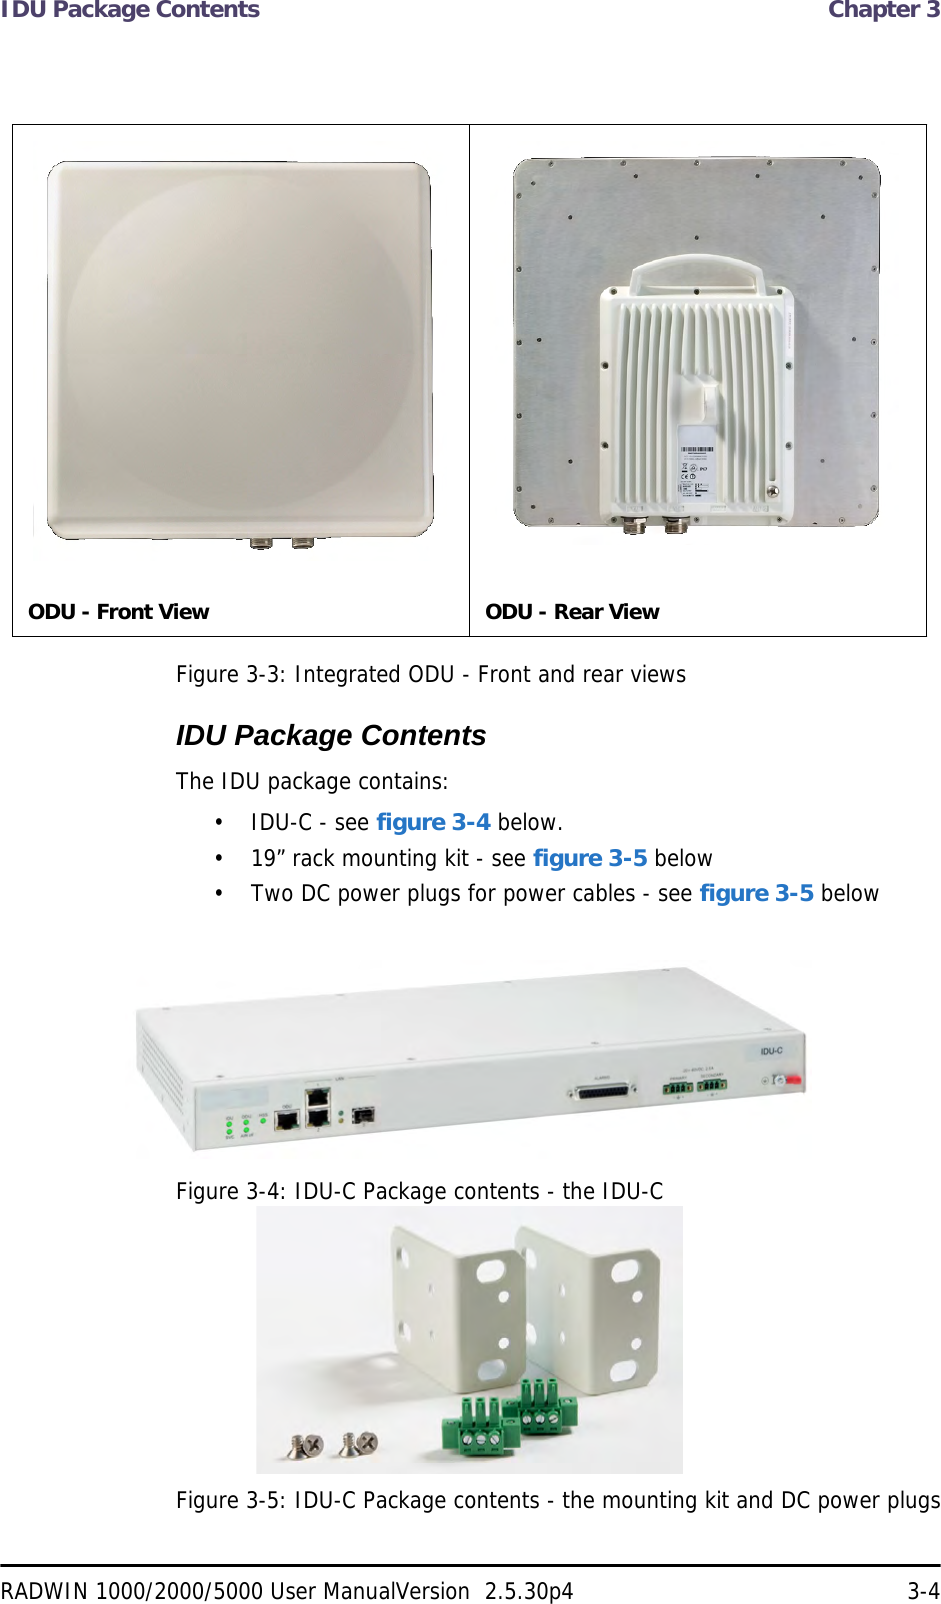 IDU Package Contents  Chapter 3RADWIN 1000/2000/5000 User ManualVersion  2.5.30p4 3-4Figure 3-3: Integrated ODU - Front and rear viewsIDU Package ContentsThe IDU package contains:• IDU-C - see figure 3-4 below.• 19” rack mounting kit - see figure 3-5 below• Two DC power plugs for power cables - see figure 3-5 belowFigure 3-4: IDU-C Package contents - the IDU-CFigure 3-5: IDU-C Package contents - the mounting kit and DC power plugsODU - Front View ODU - Rear View